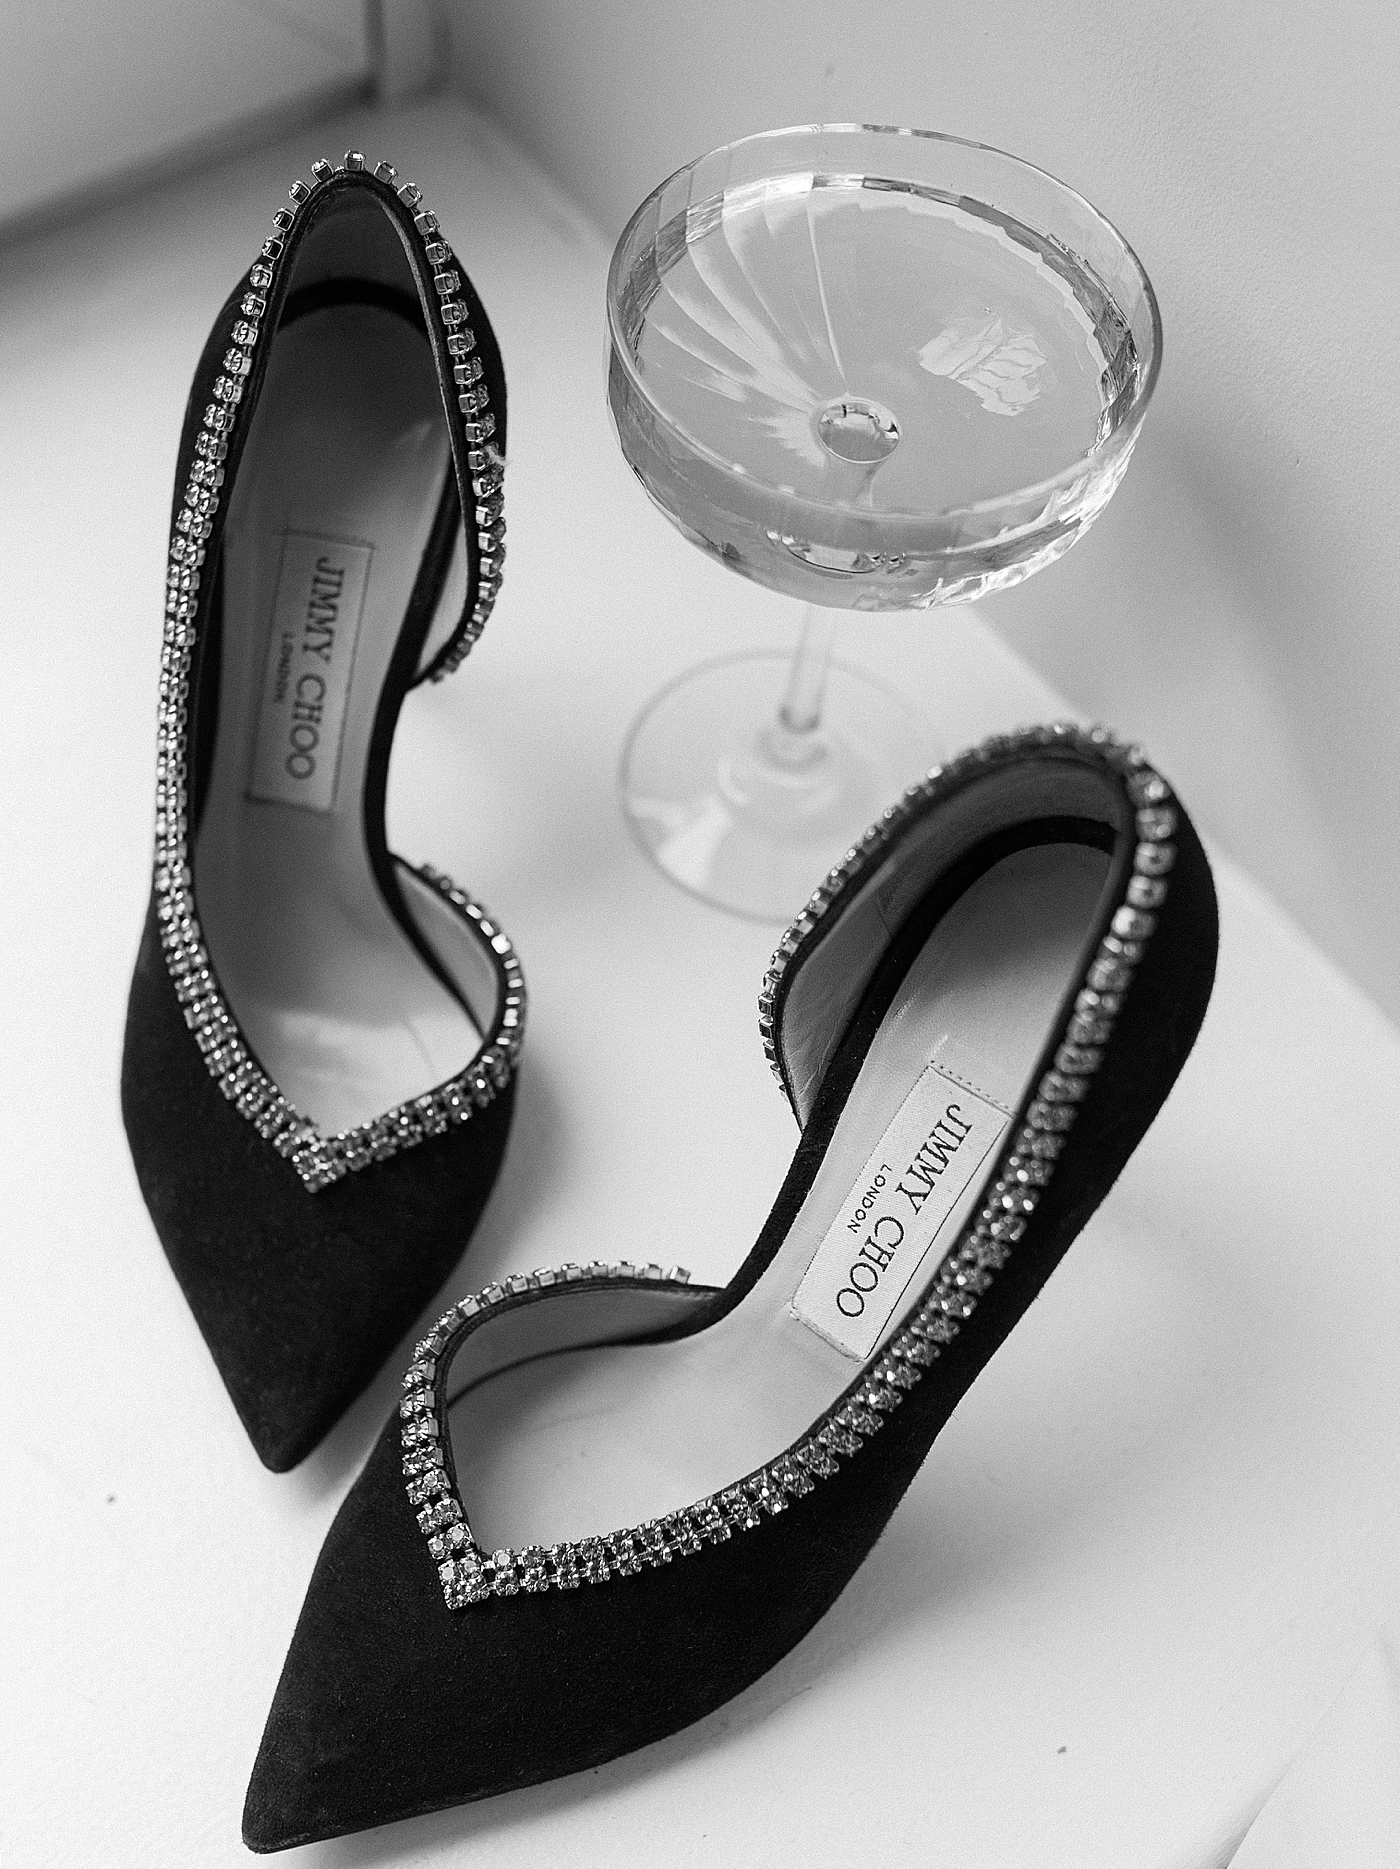 Black Jimmy Choo heels and a champagne flute | Photo by NYC Wedding Photographer Hope Helmuth 